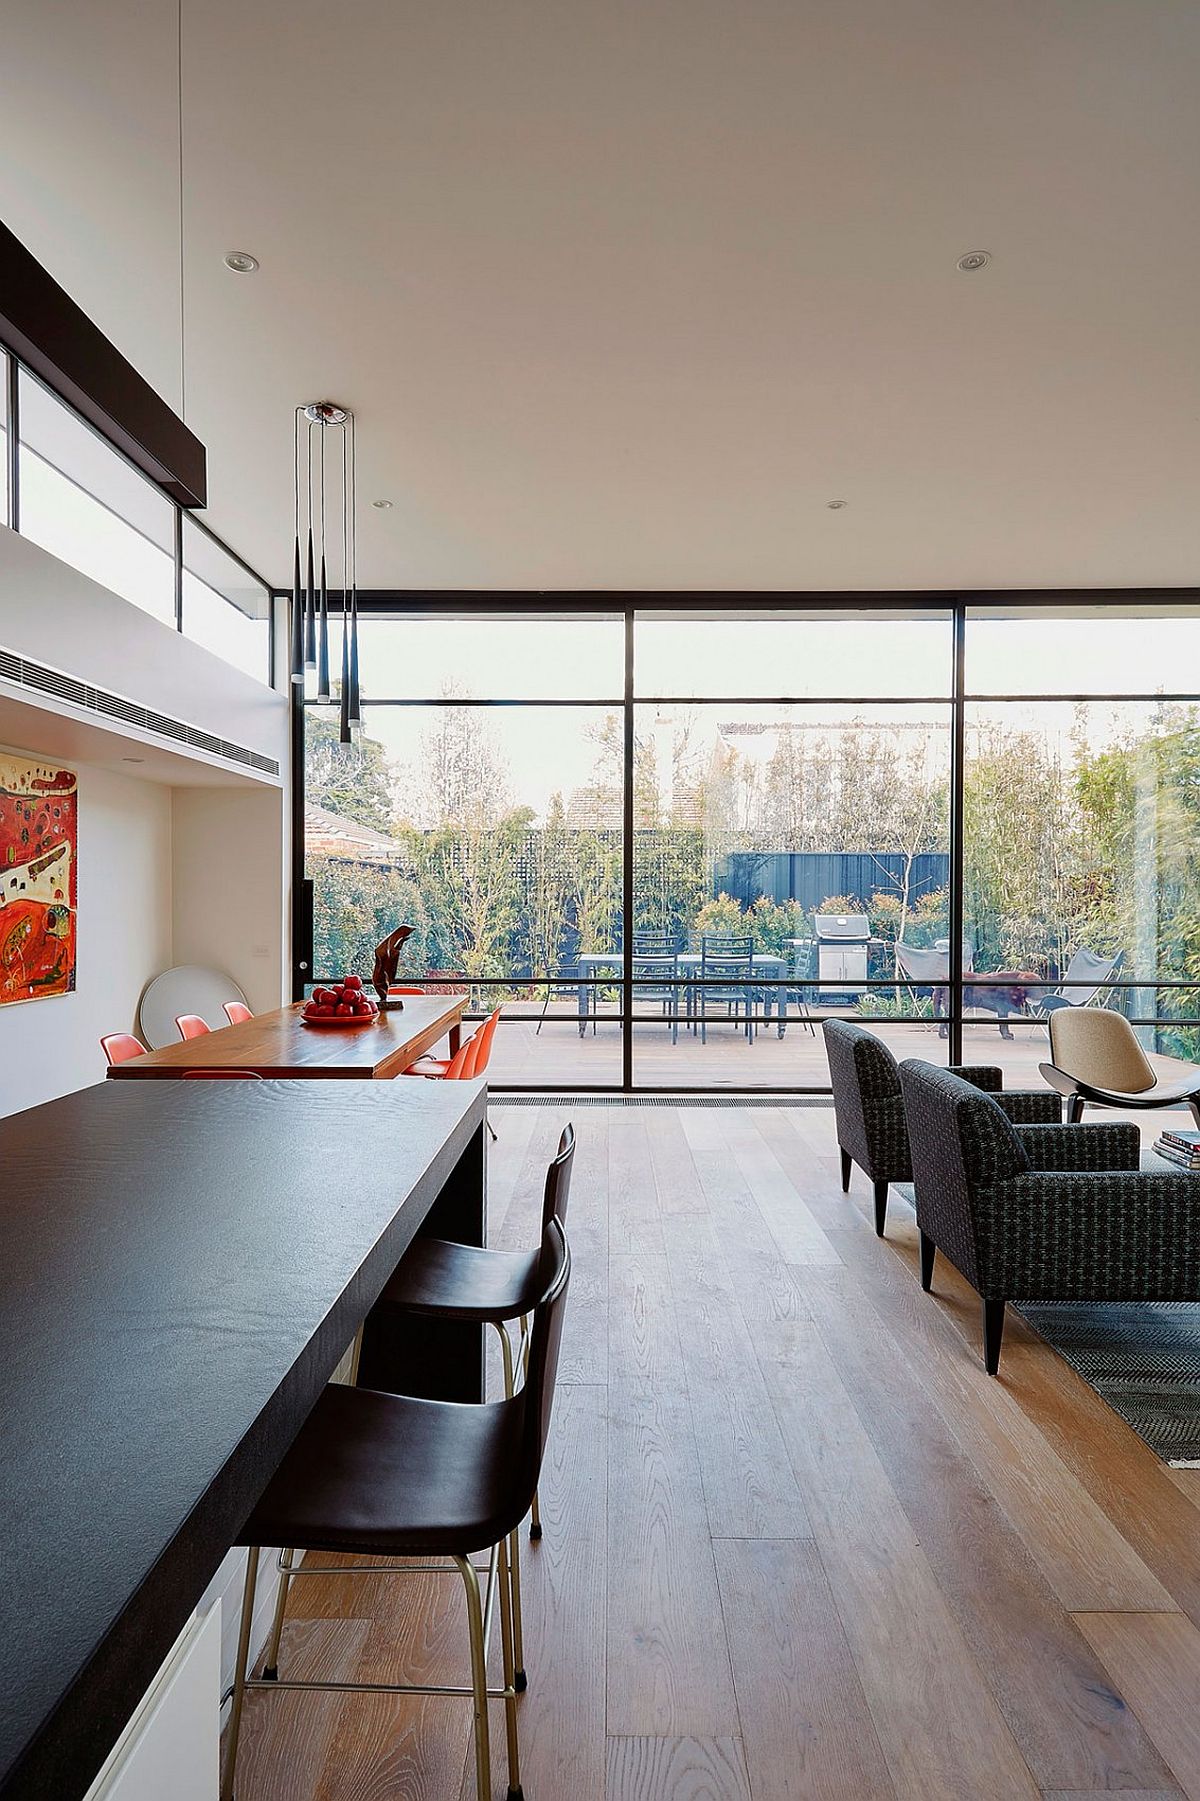 Glass walls provide protection from the elements while keeping the interior connected with the backyard